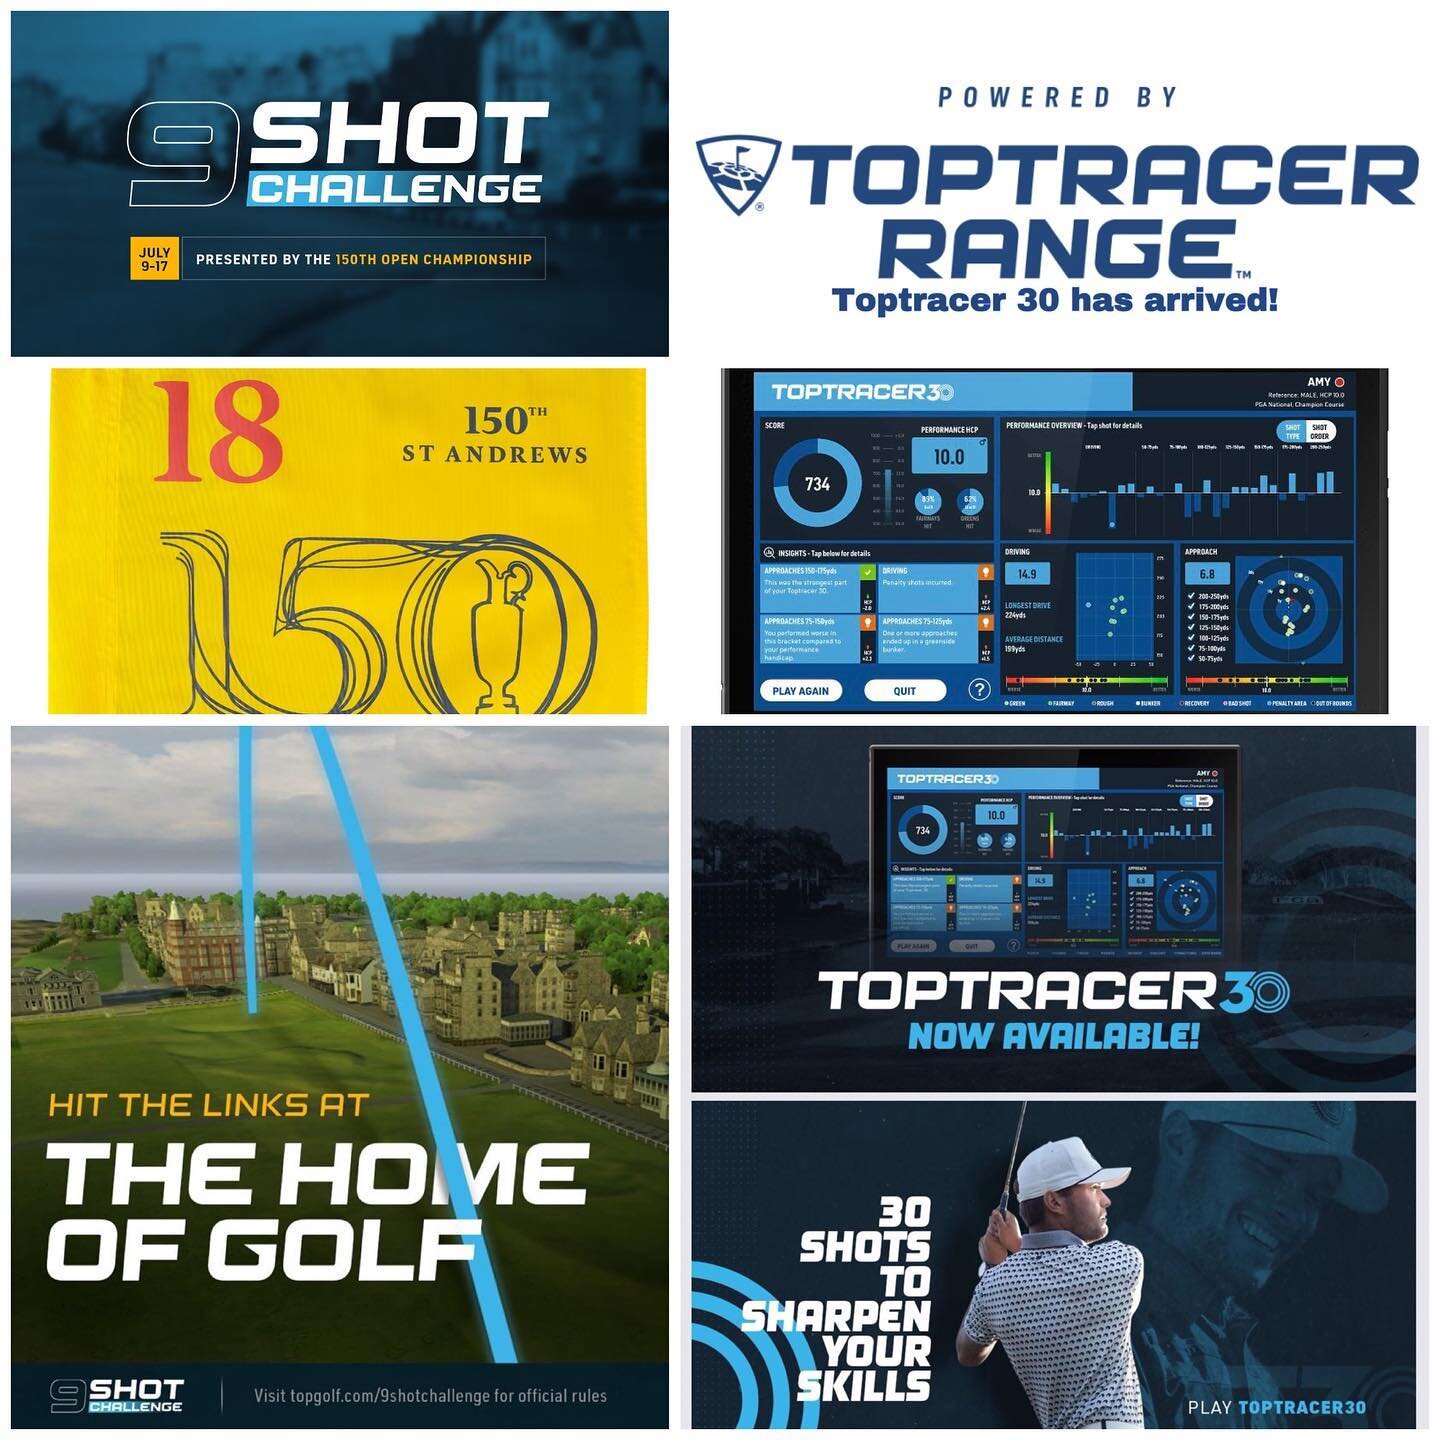 Several thousands of people globally have competed on the new #Toptracer30 game recently finding it most informative and providing highly addictive feedback on their game.  Check out your performance plus compete on local, regional and global leaderb